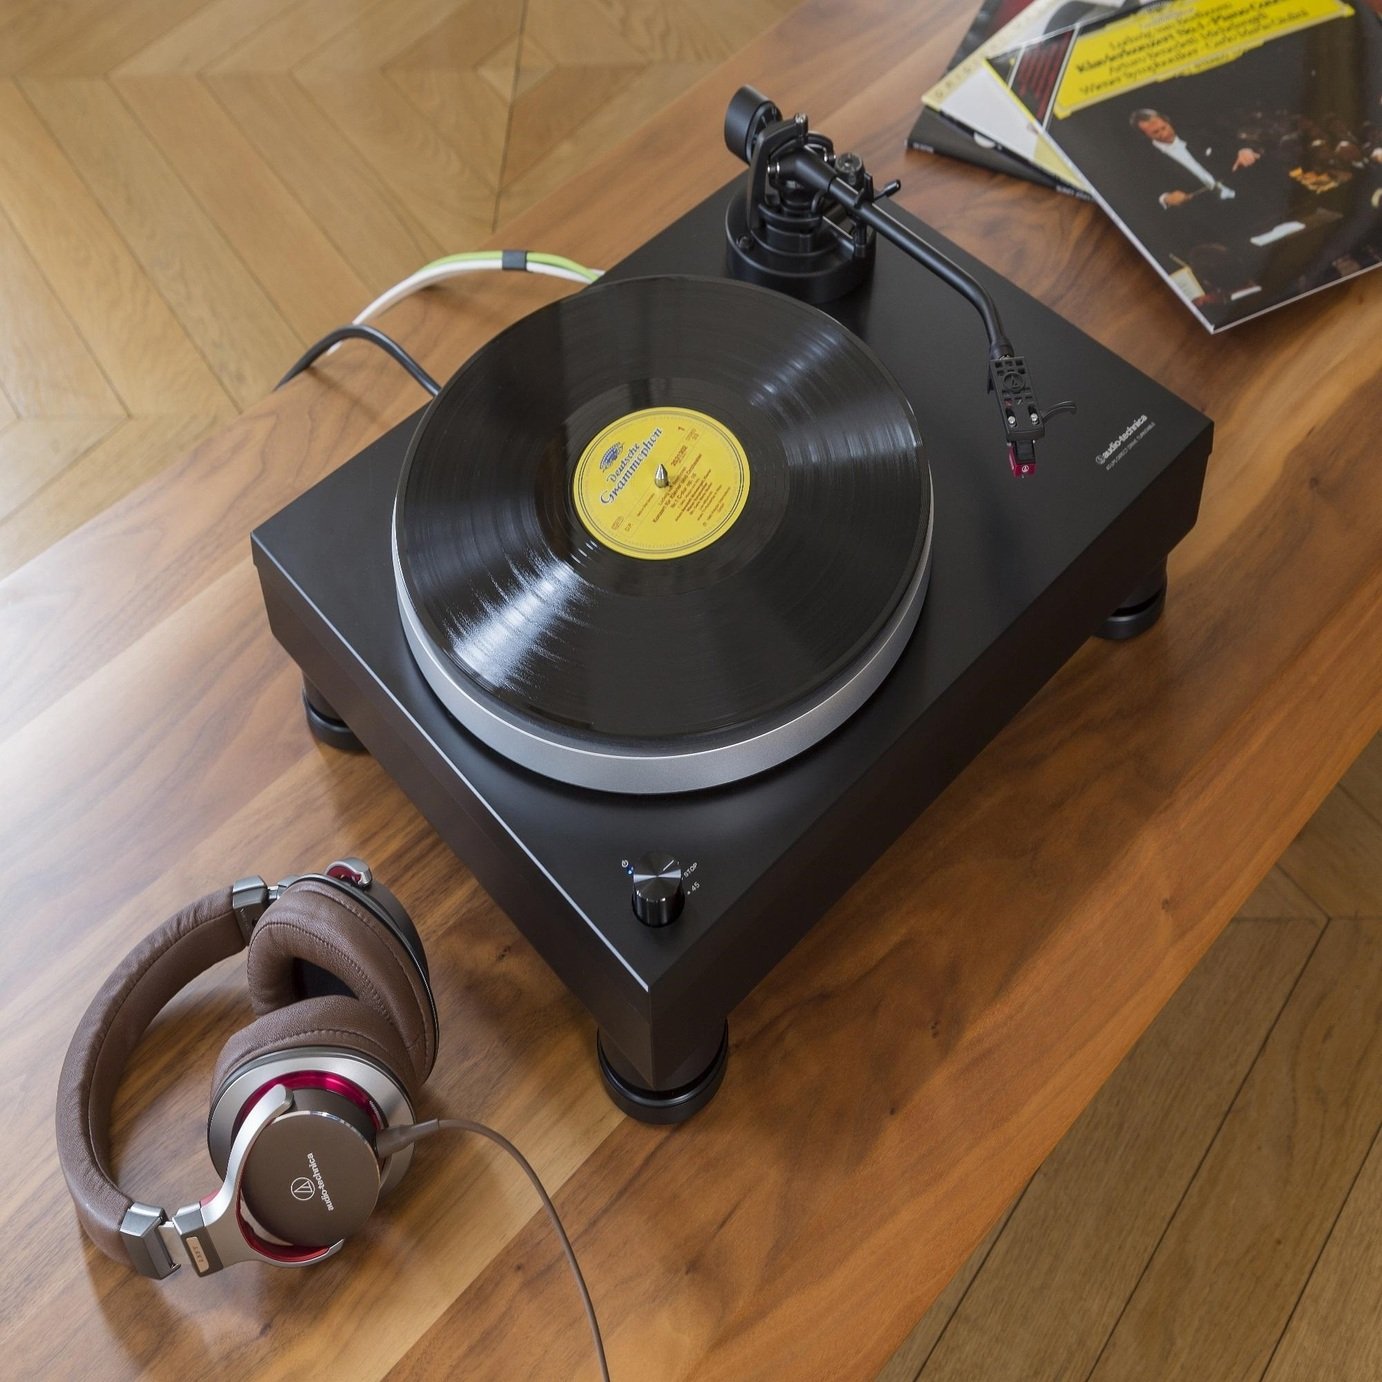 Audio-Technica AT-LP5 Direct-Drive USB Turntable Review